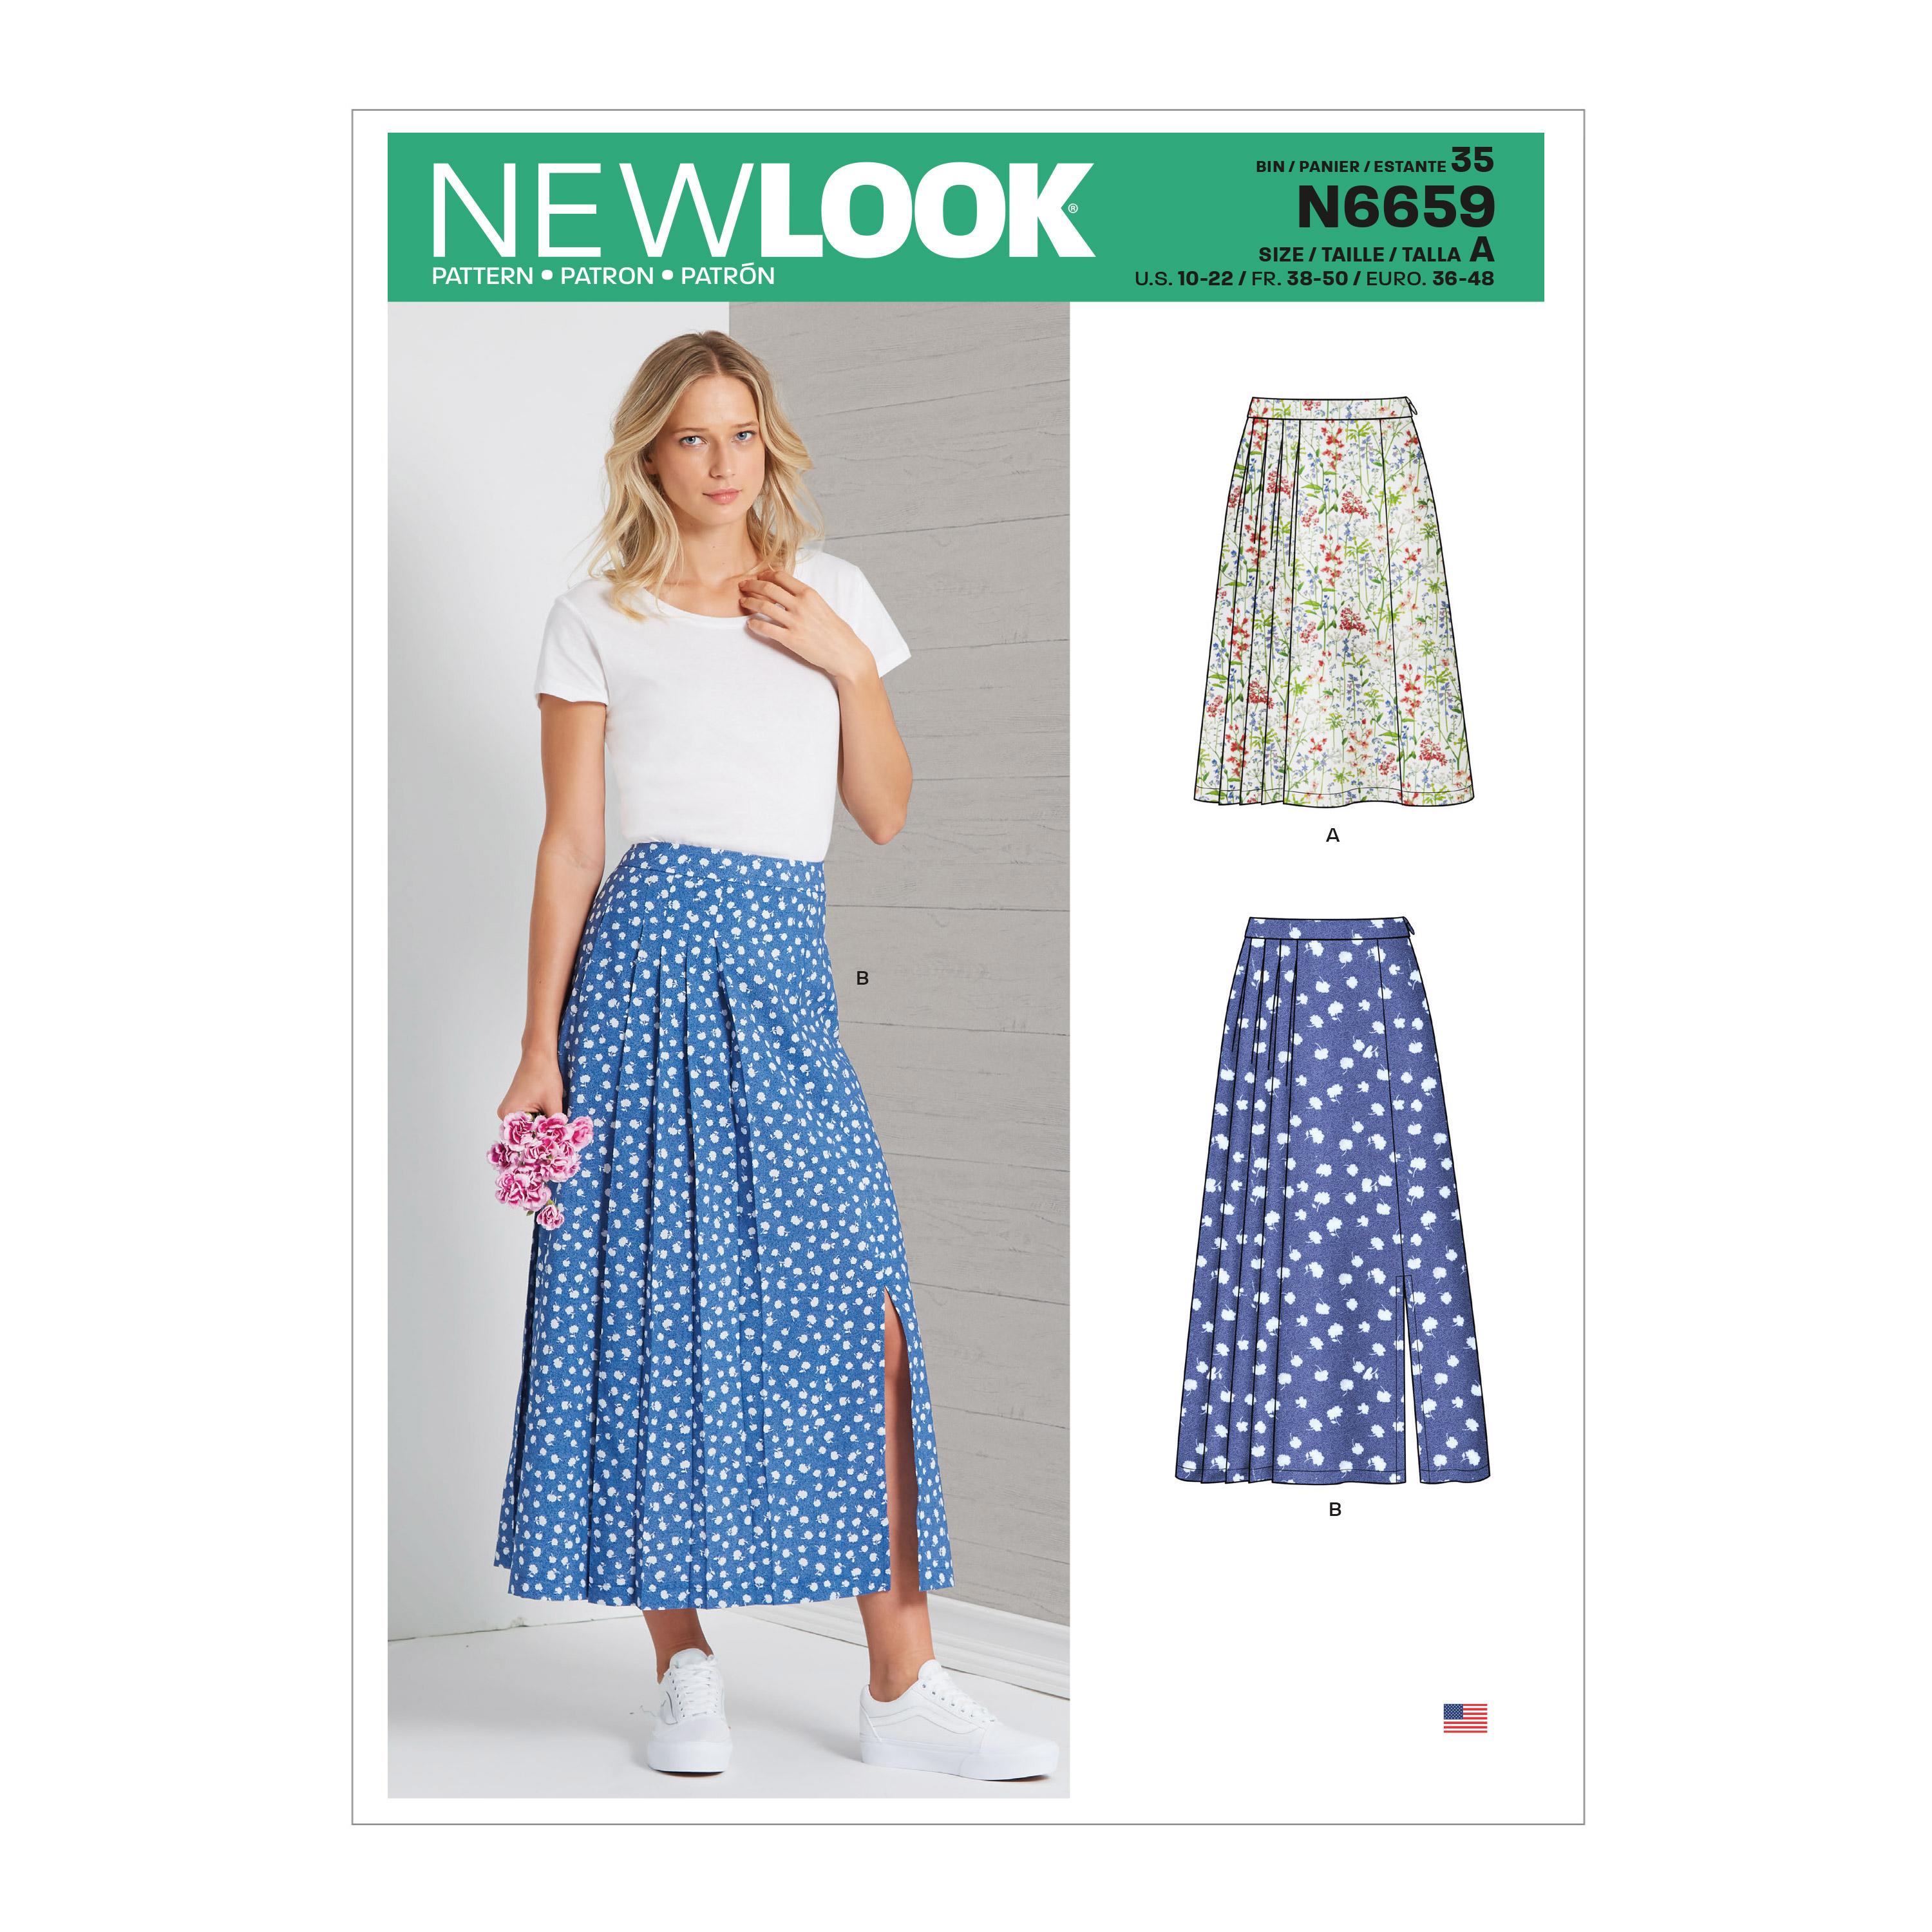 New Look Sewing Pattern N6659 Misses' Pleated Skirt With Or Without Front Slit Opening